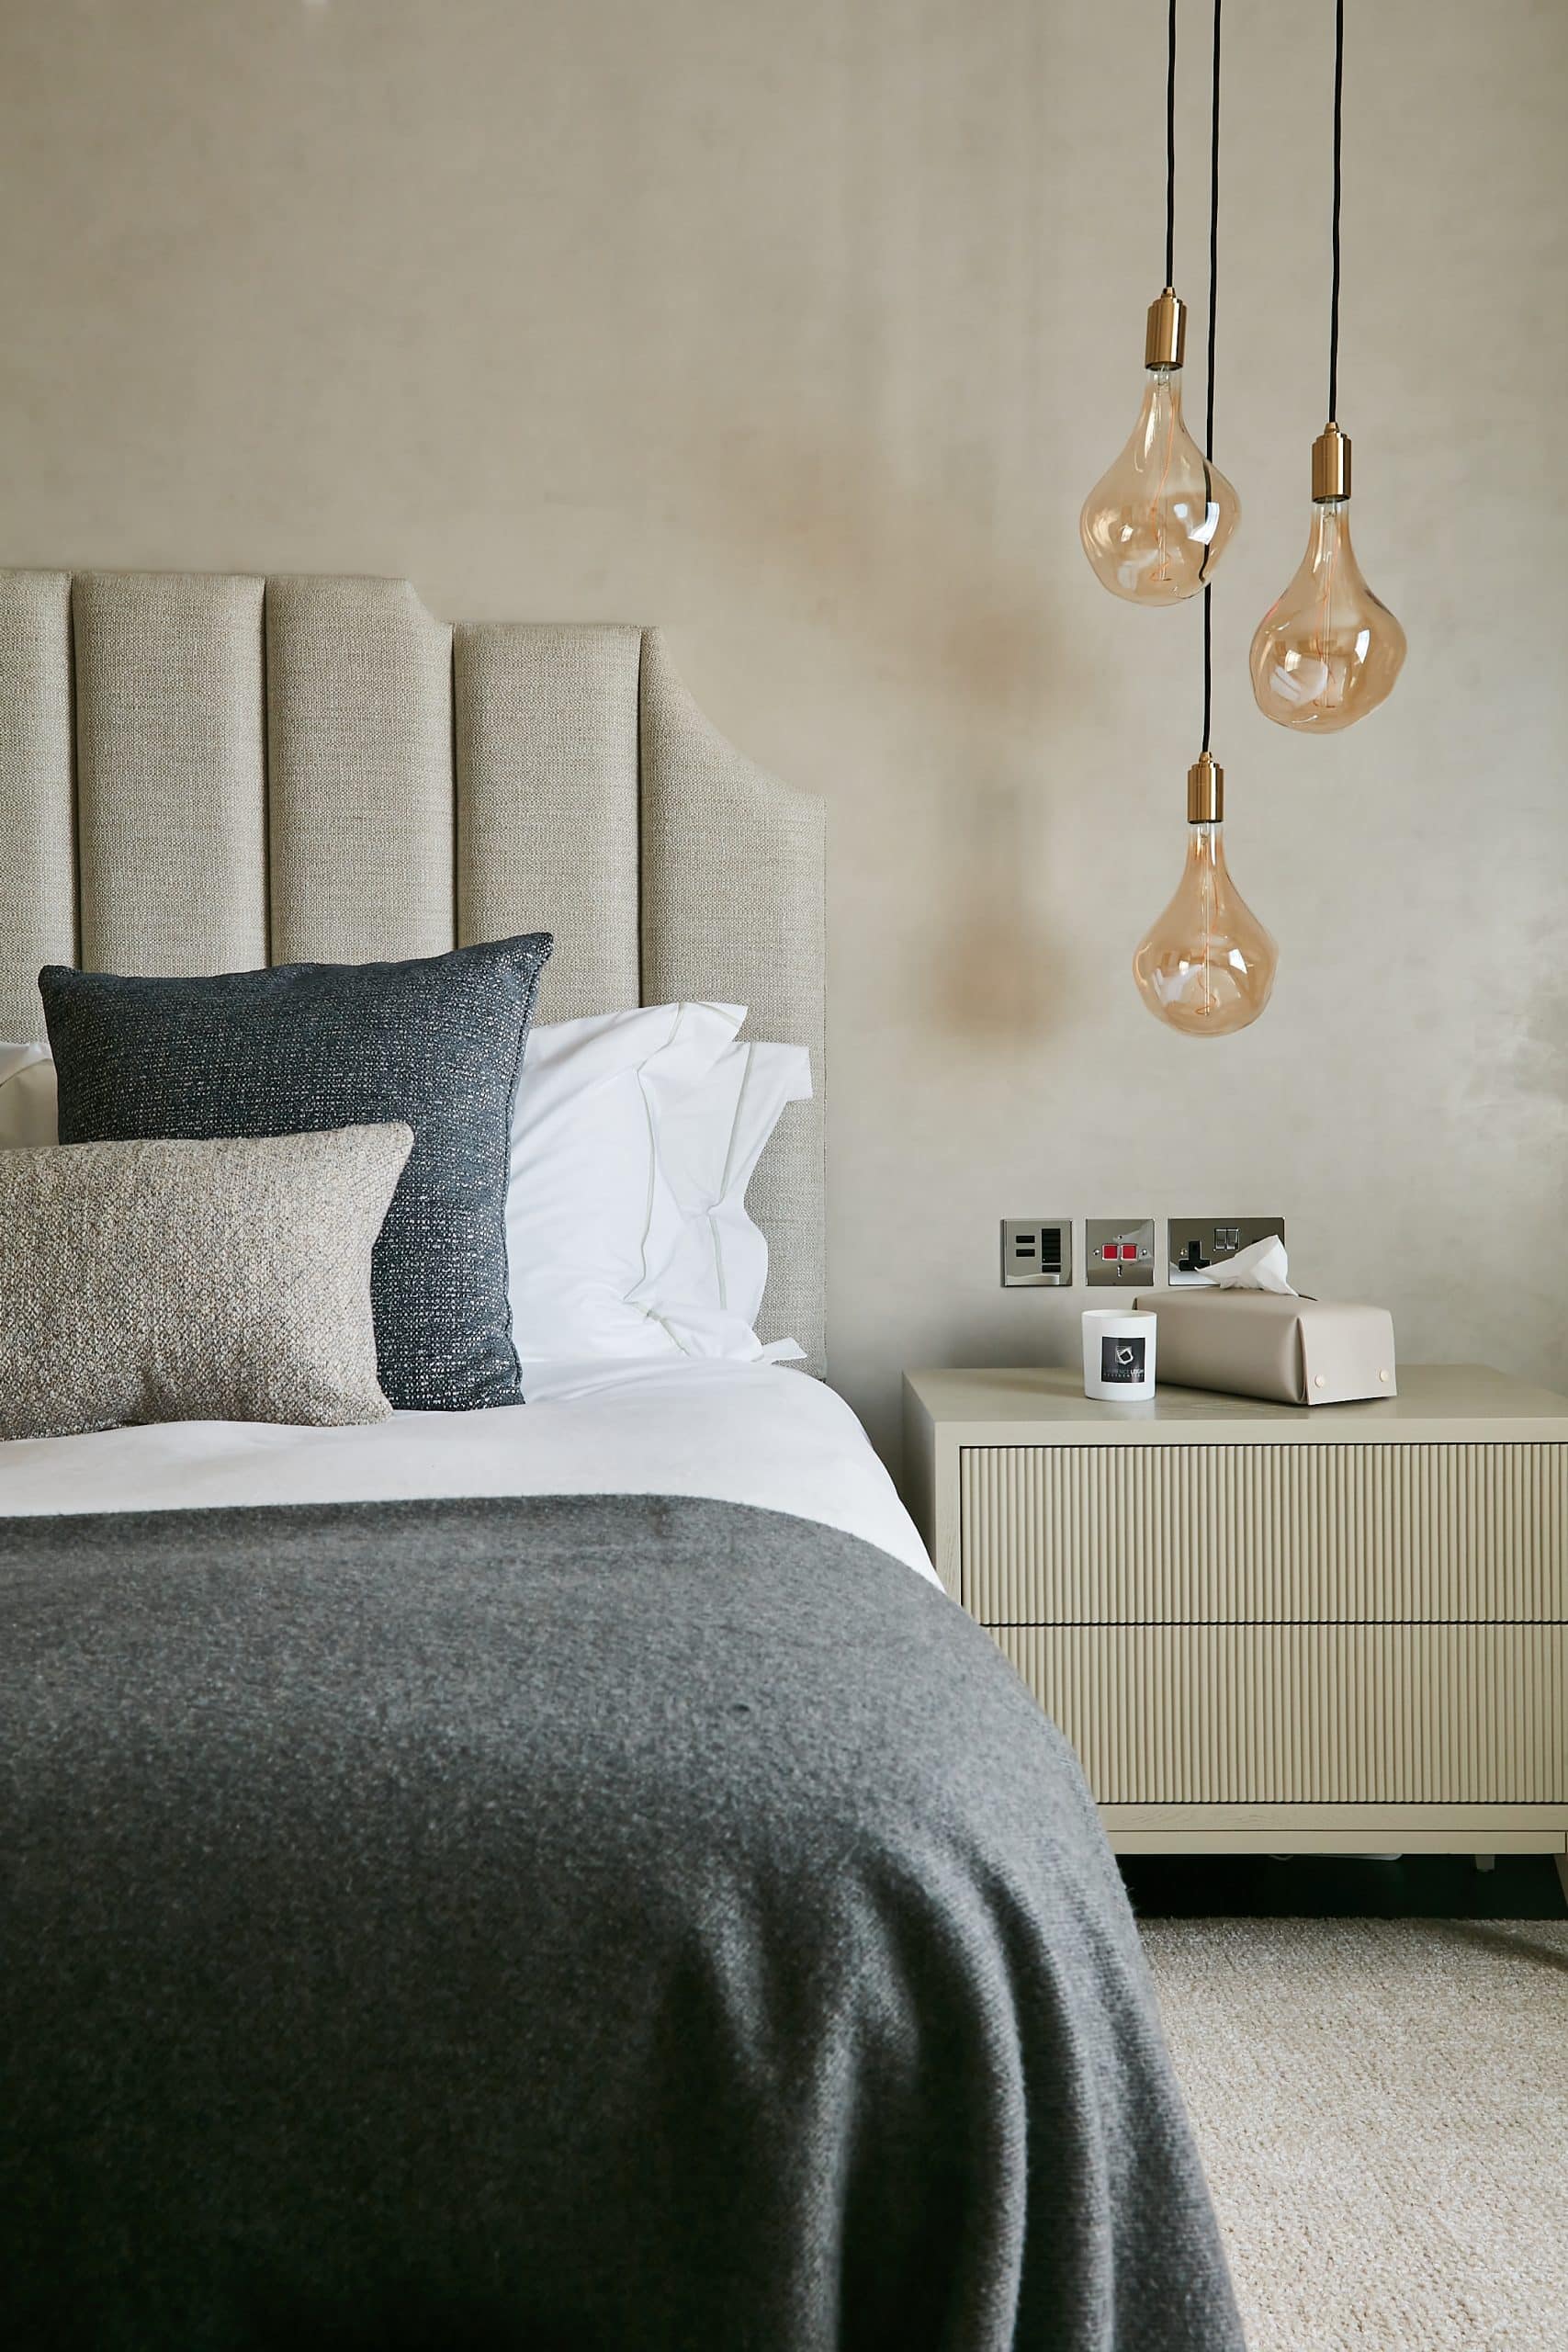 Pendant lights giving a more elevated look to neutral bed.